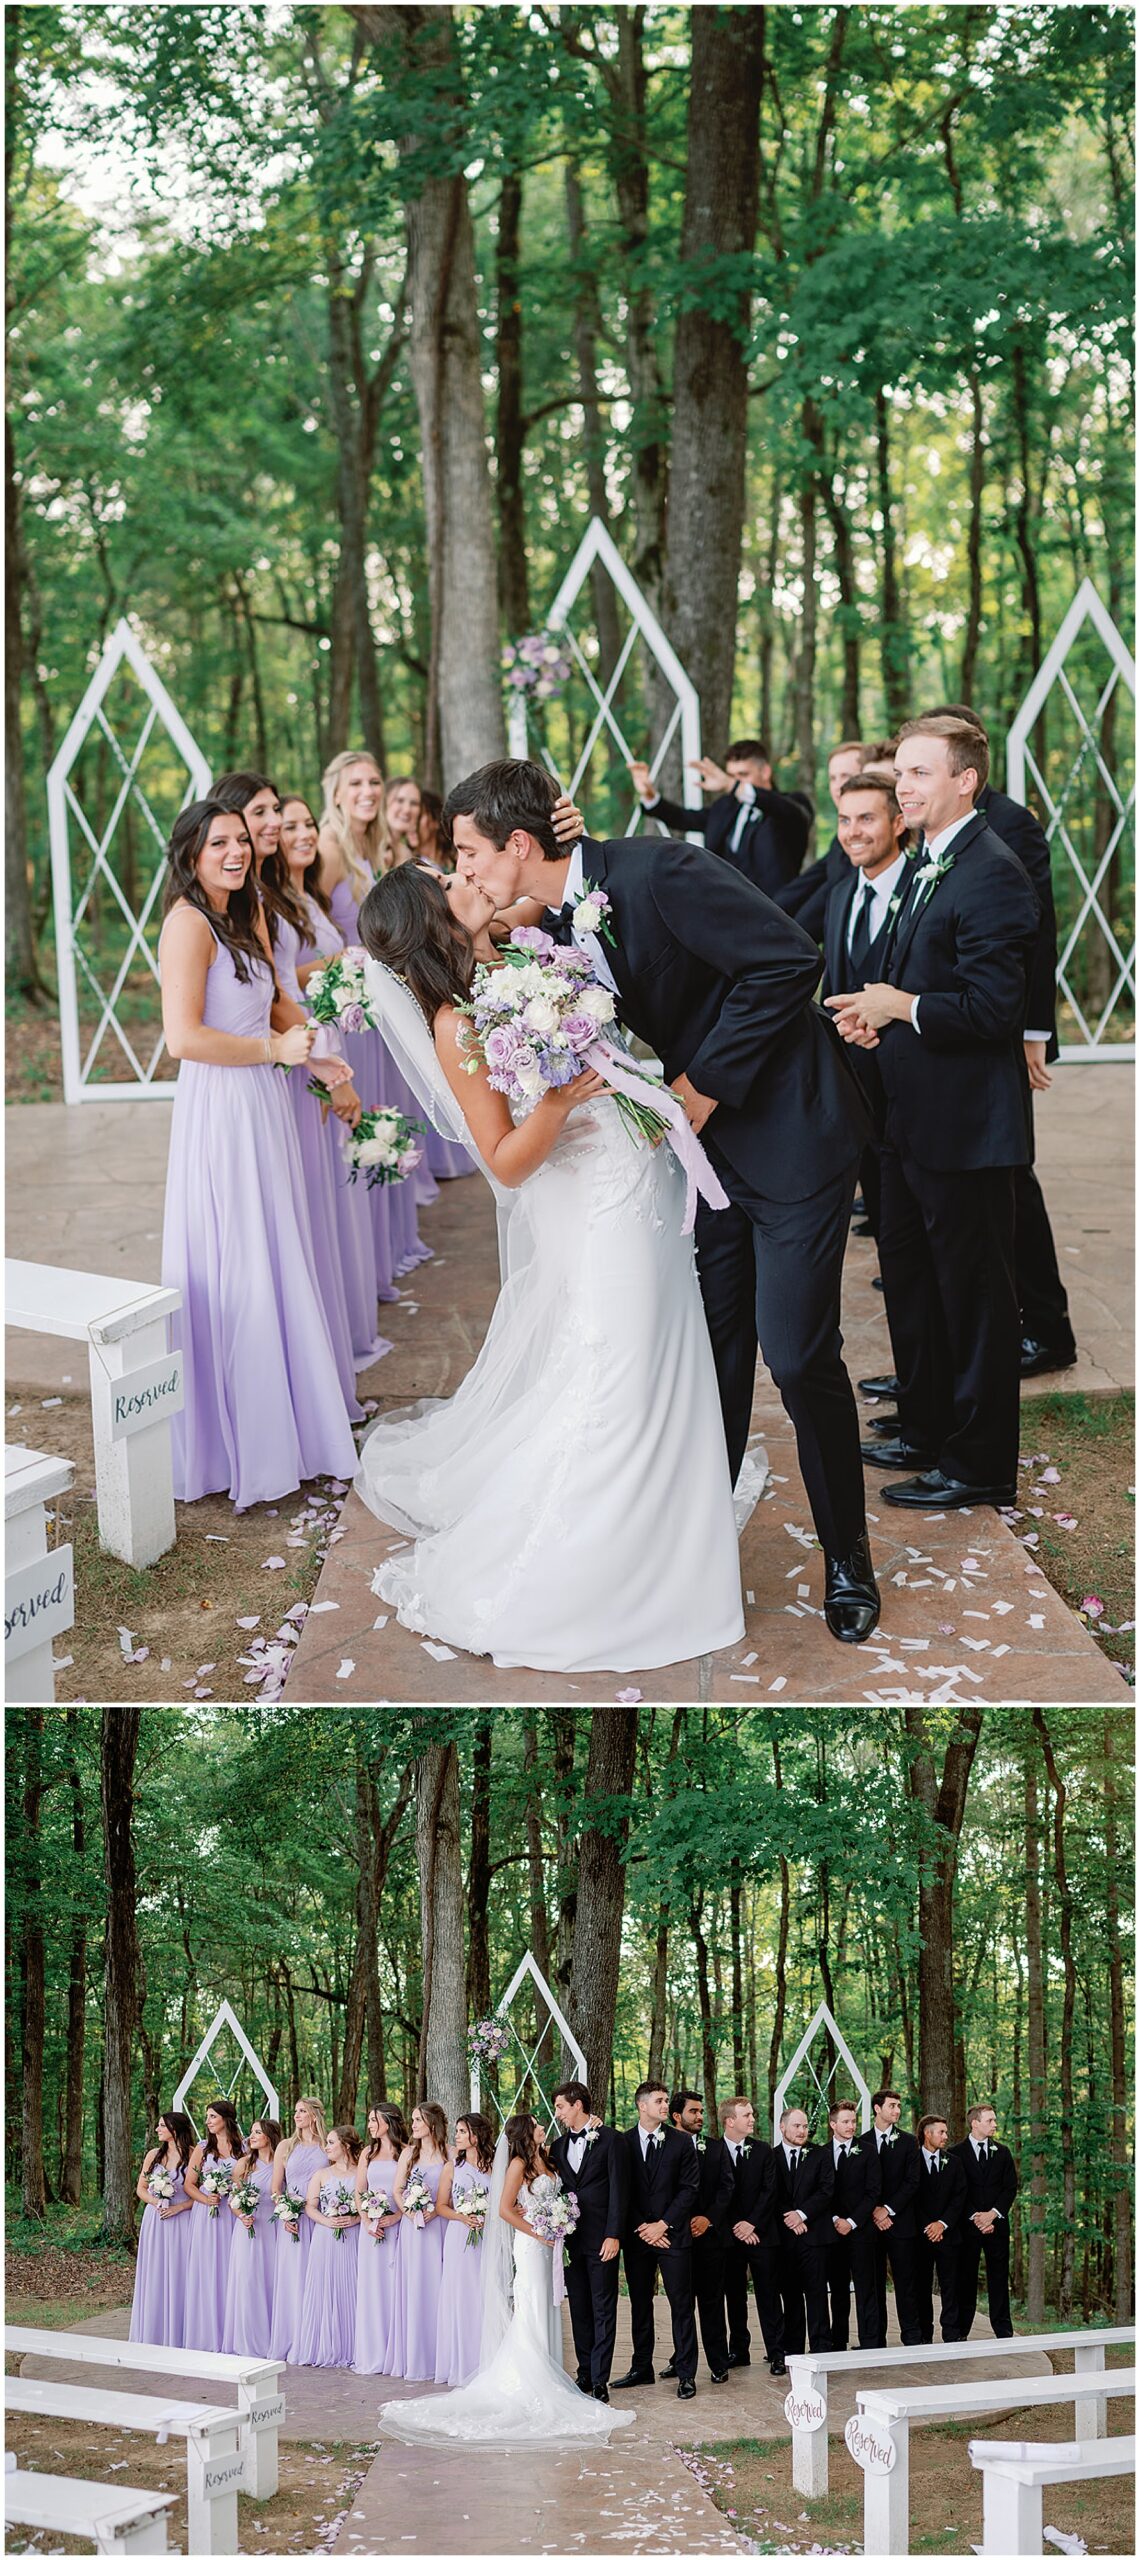 Newlyweds kiss in the middle of their large wedding party at their hickory meadow charlotte tn wedding